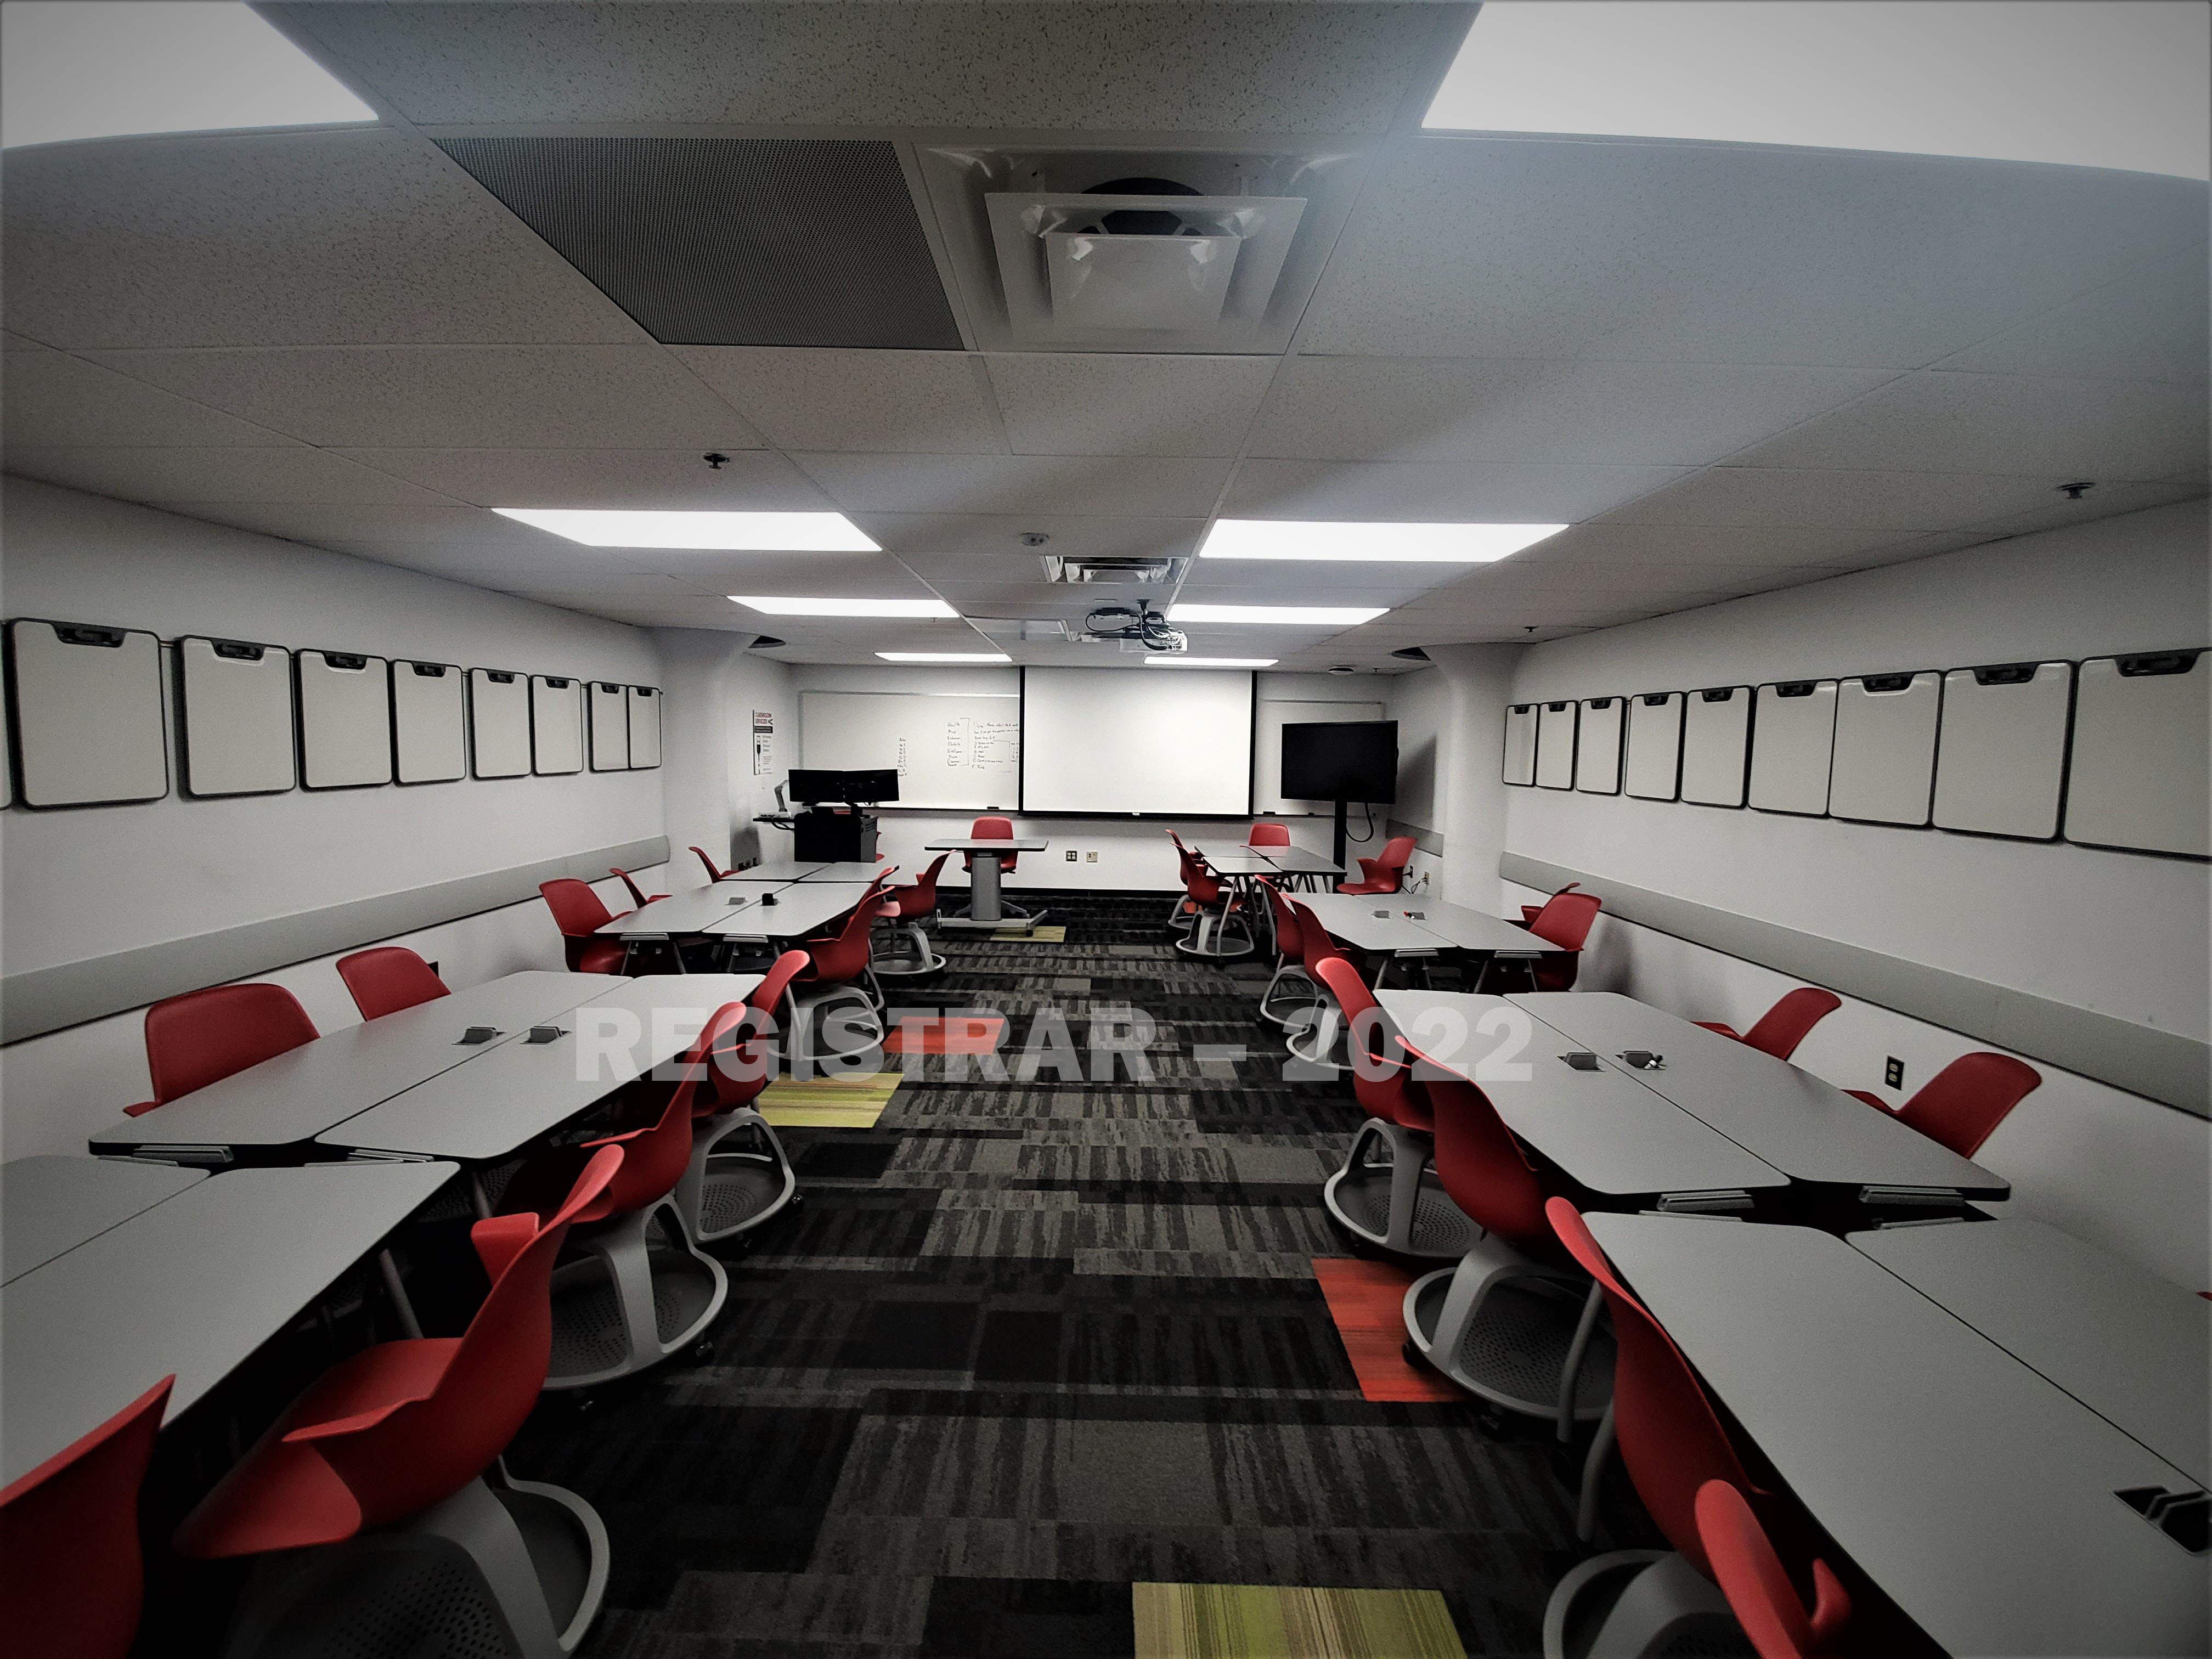 Enarson Classroom Building room 14 ultra wide angle view from the back of the room with projector screen down